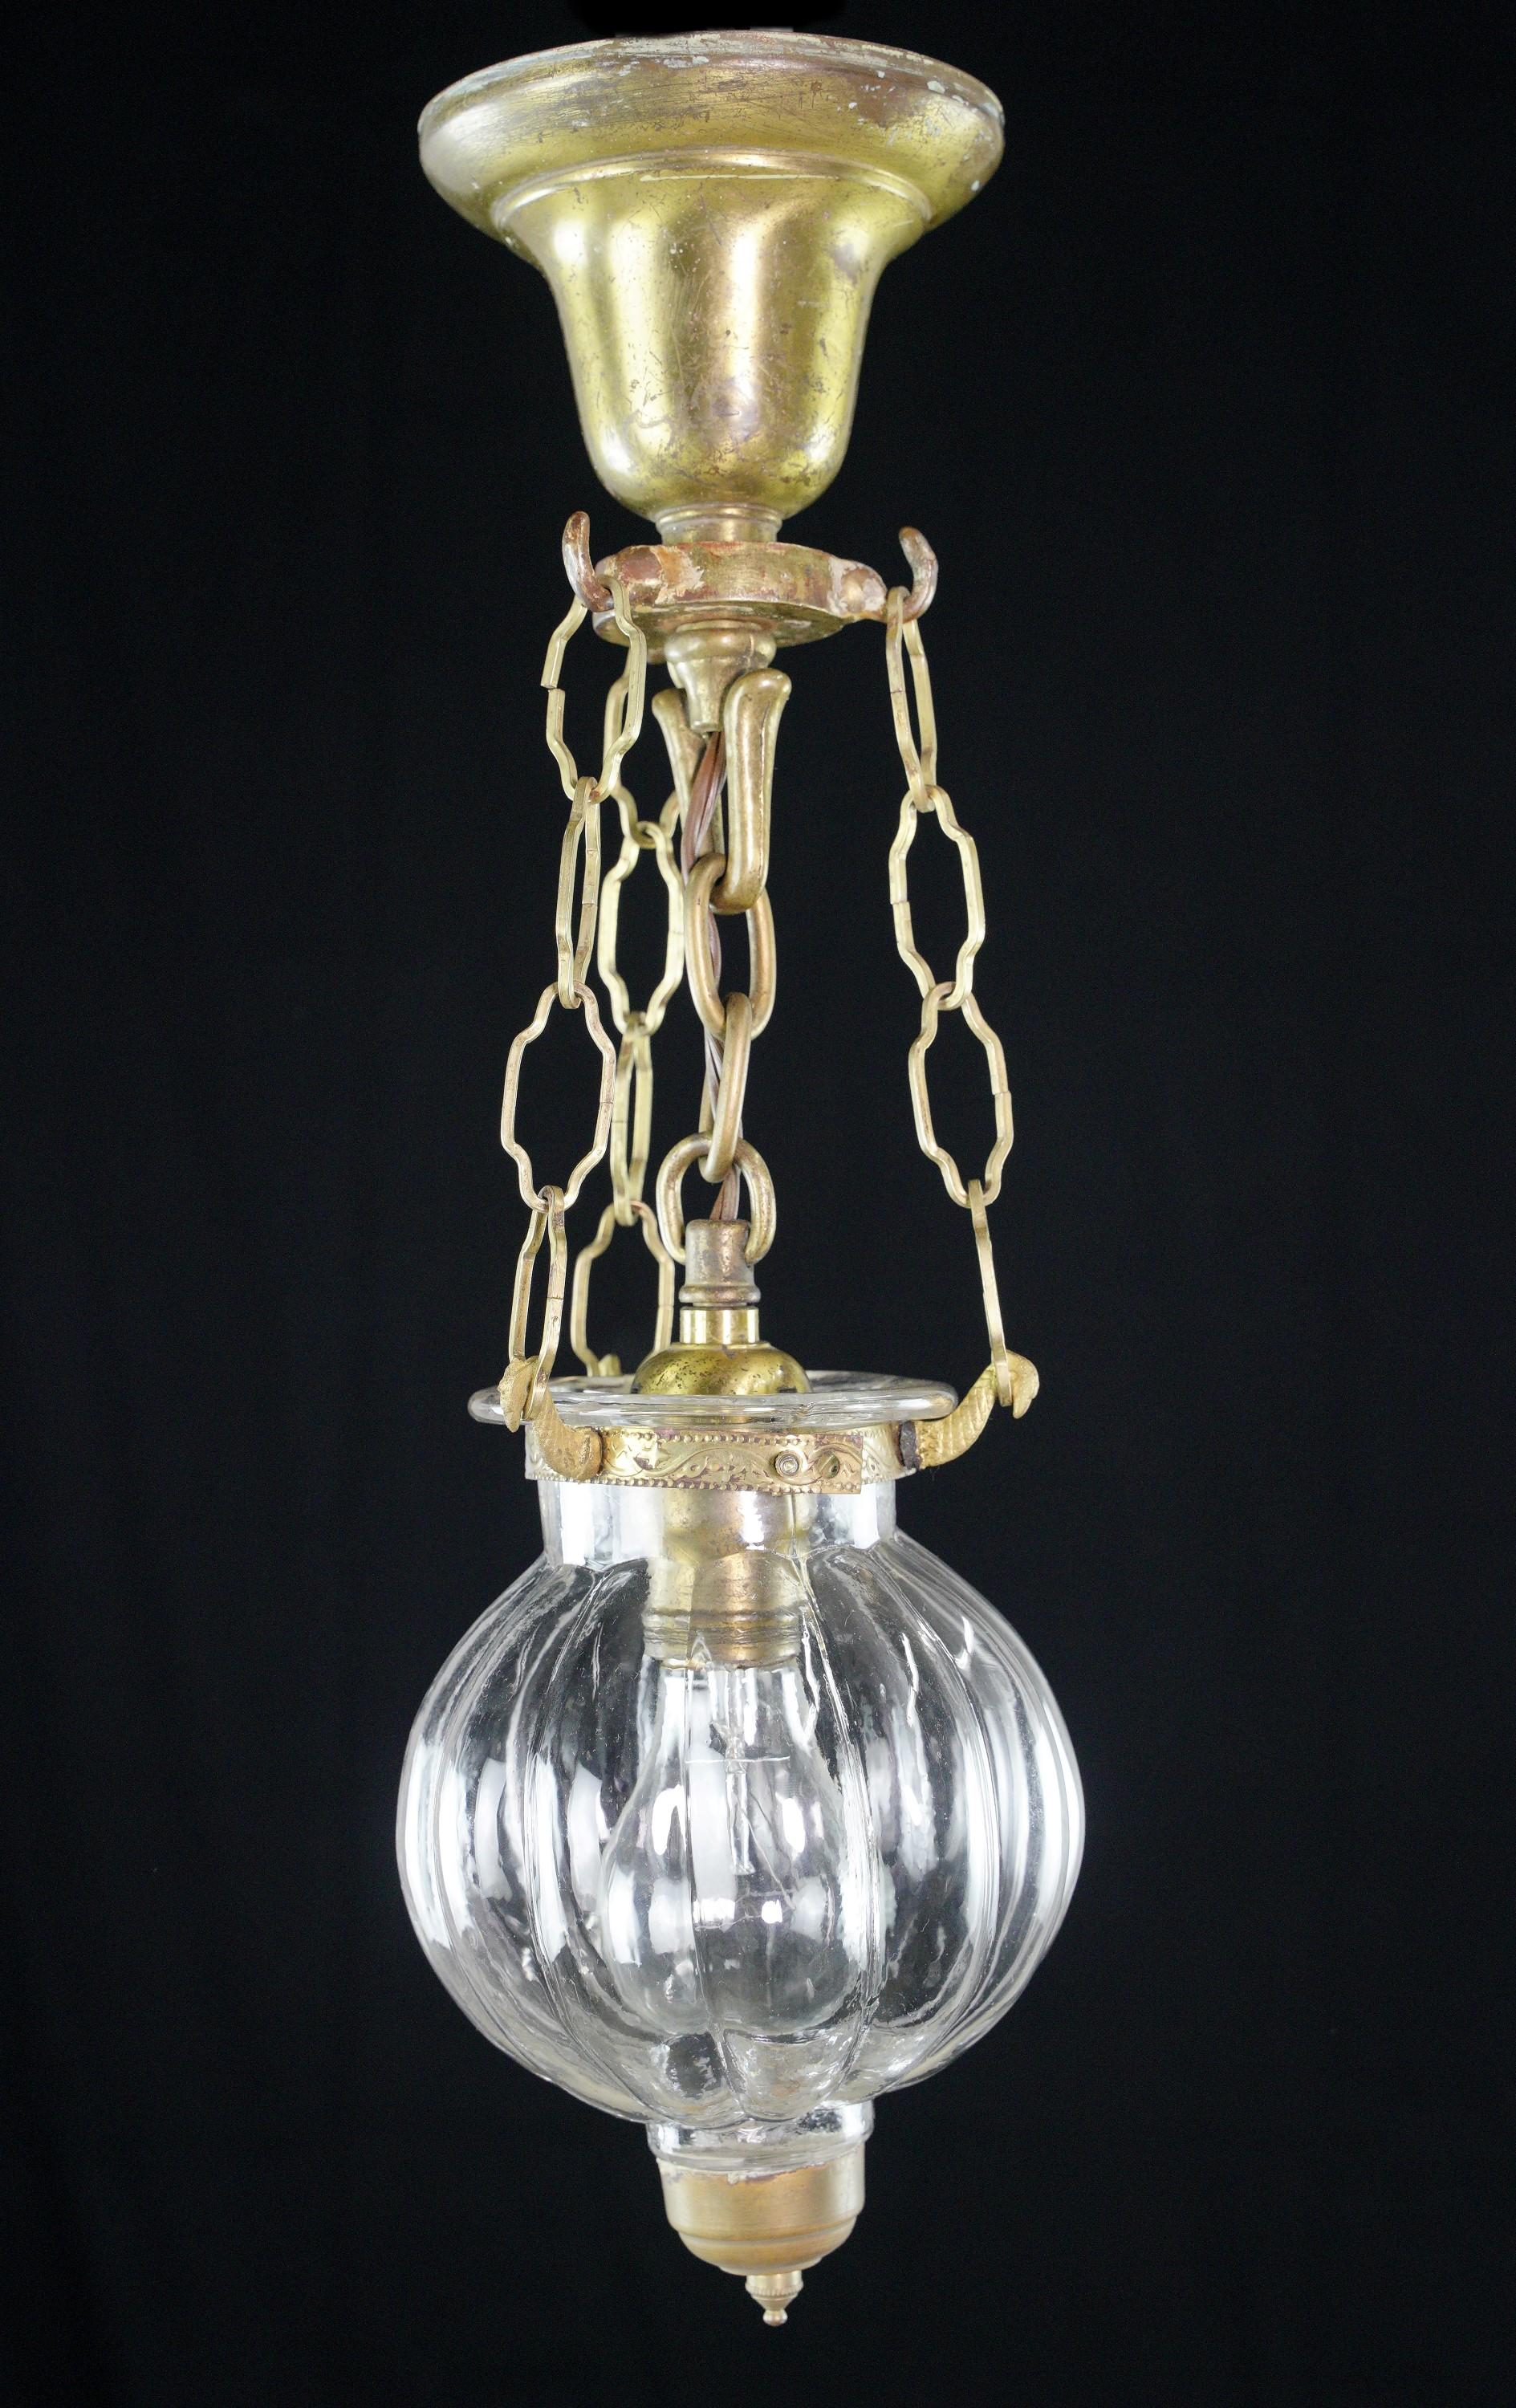 The vintage onion shaped glass bell jar pendant light is a nostalgic lighting fixture that combines the charm of brushed brass, steel construction, and a clear glass ball, creating a captivating vintage ambiance in any space. Cleaned and restored.